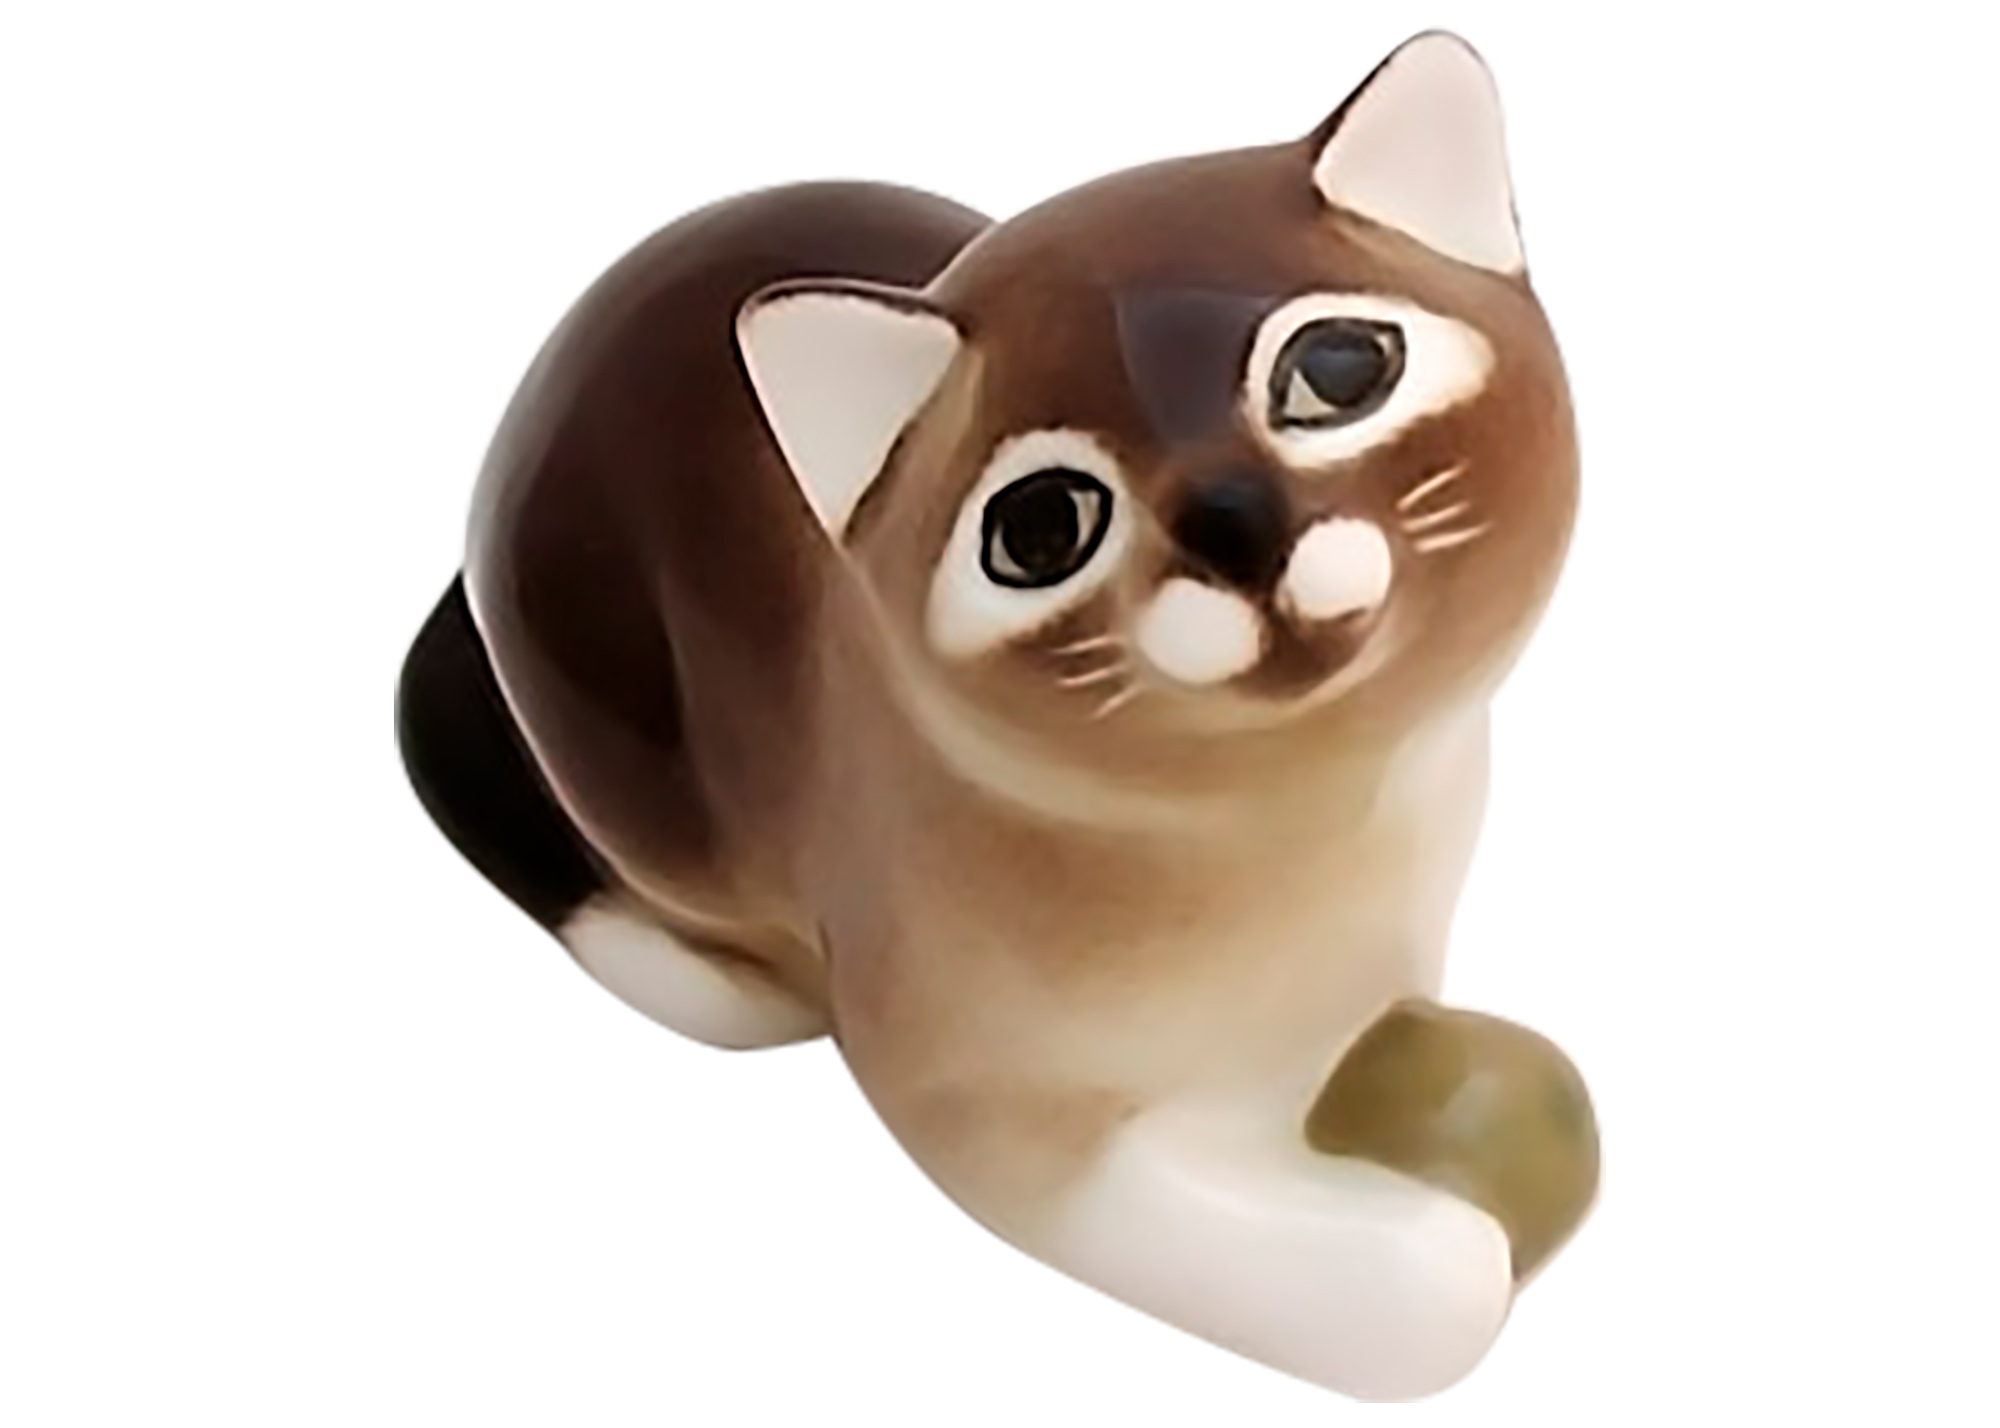 Buy Brown Kitten with a Ball Figurine at GoldenCockerel.com